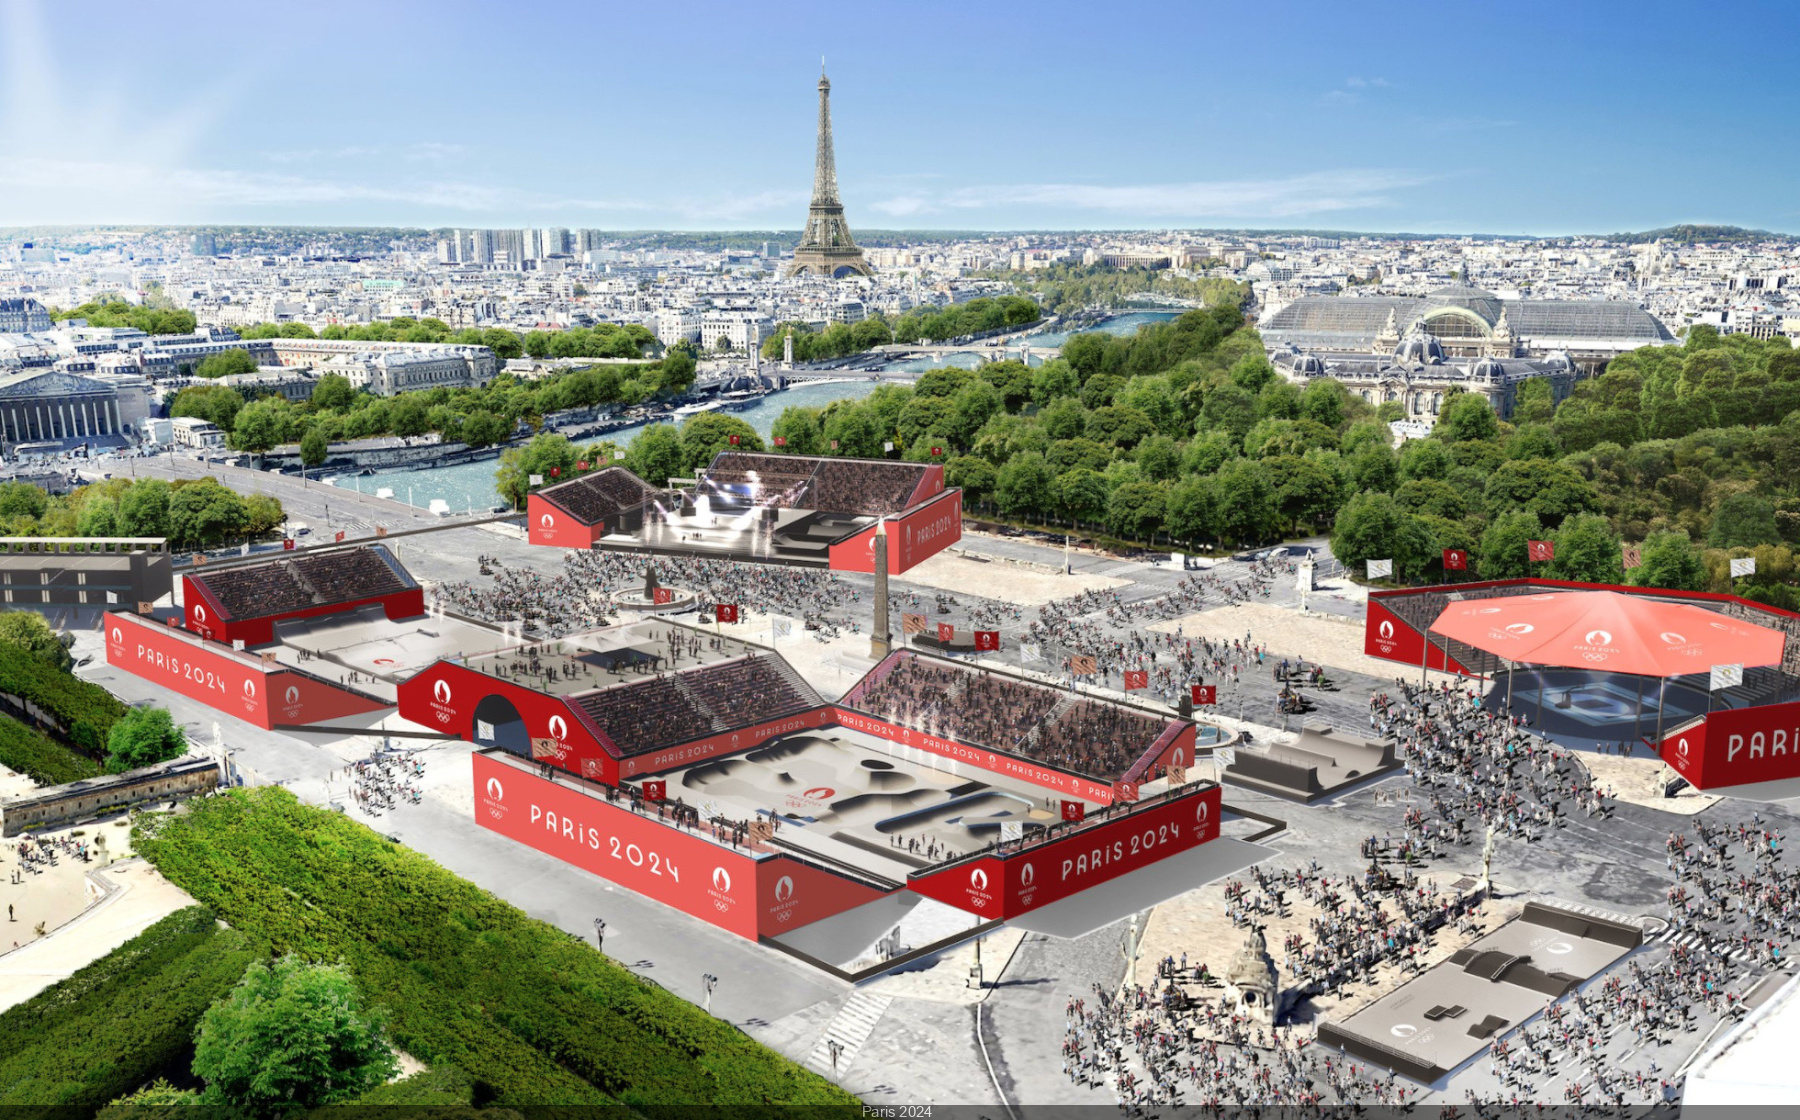 Paris 2024 Summer Olympics first pictures of the Olympic venue of the